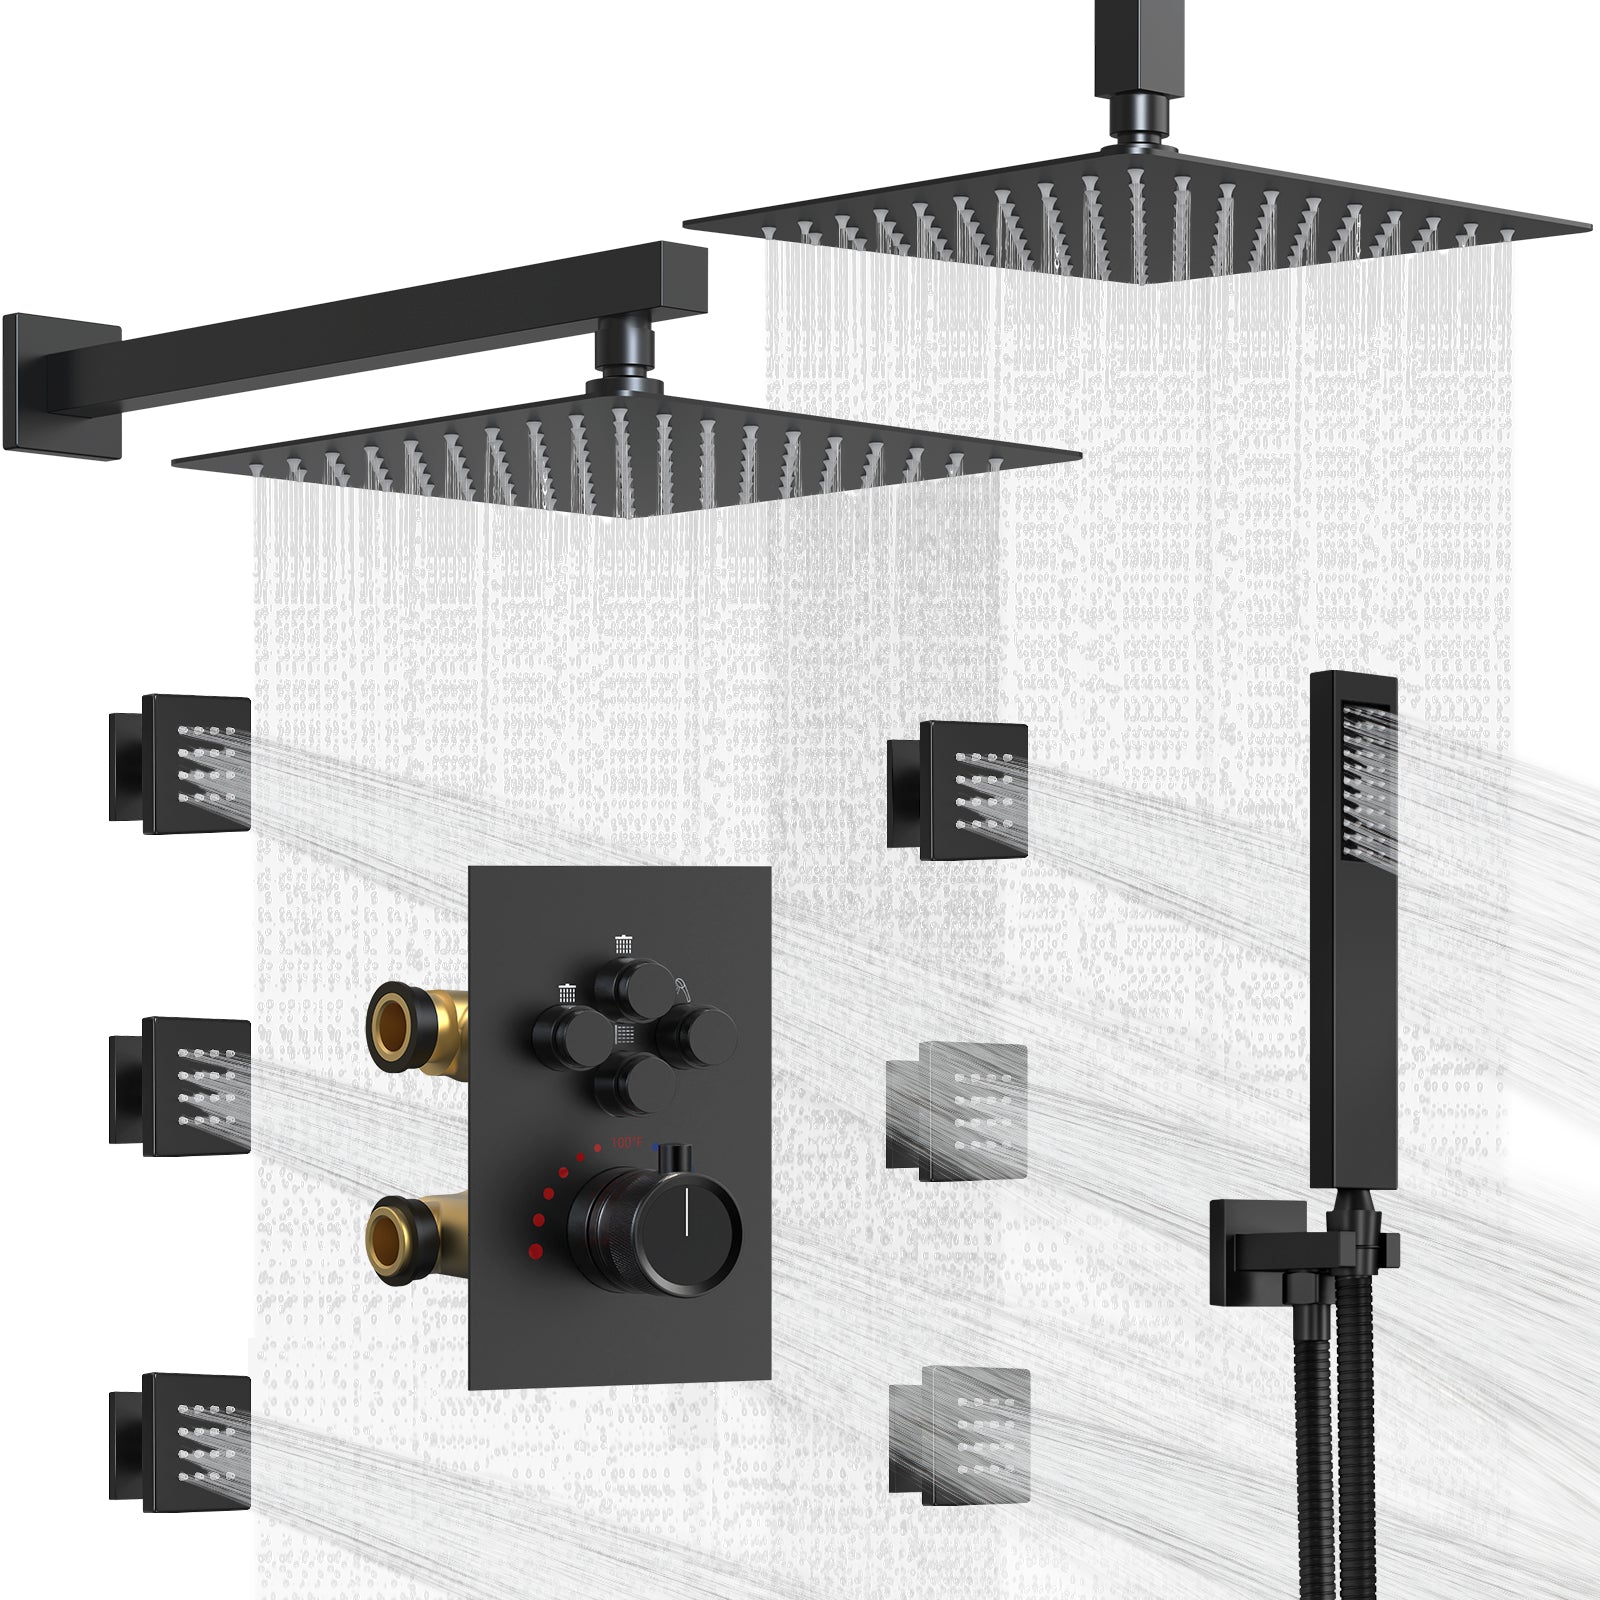 SKS-1032-BK12 12 in. Ceiling Mount Dual Shower Head and Handheld Shower 2.5 GPM with 6-Jets in Matte Black(Valve Included)